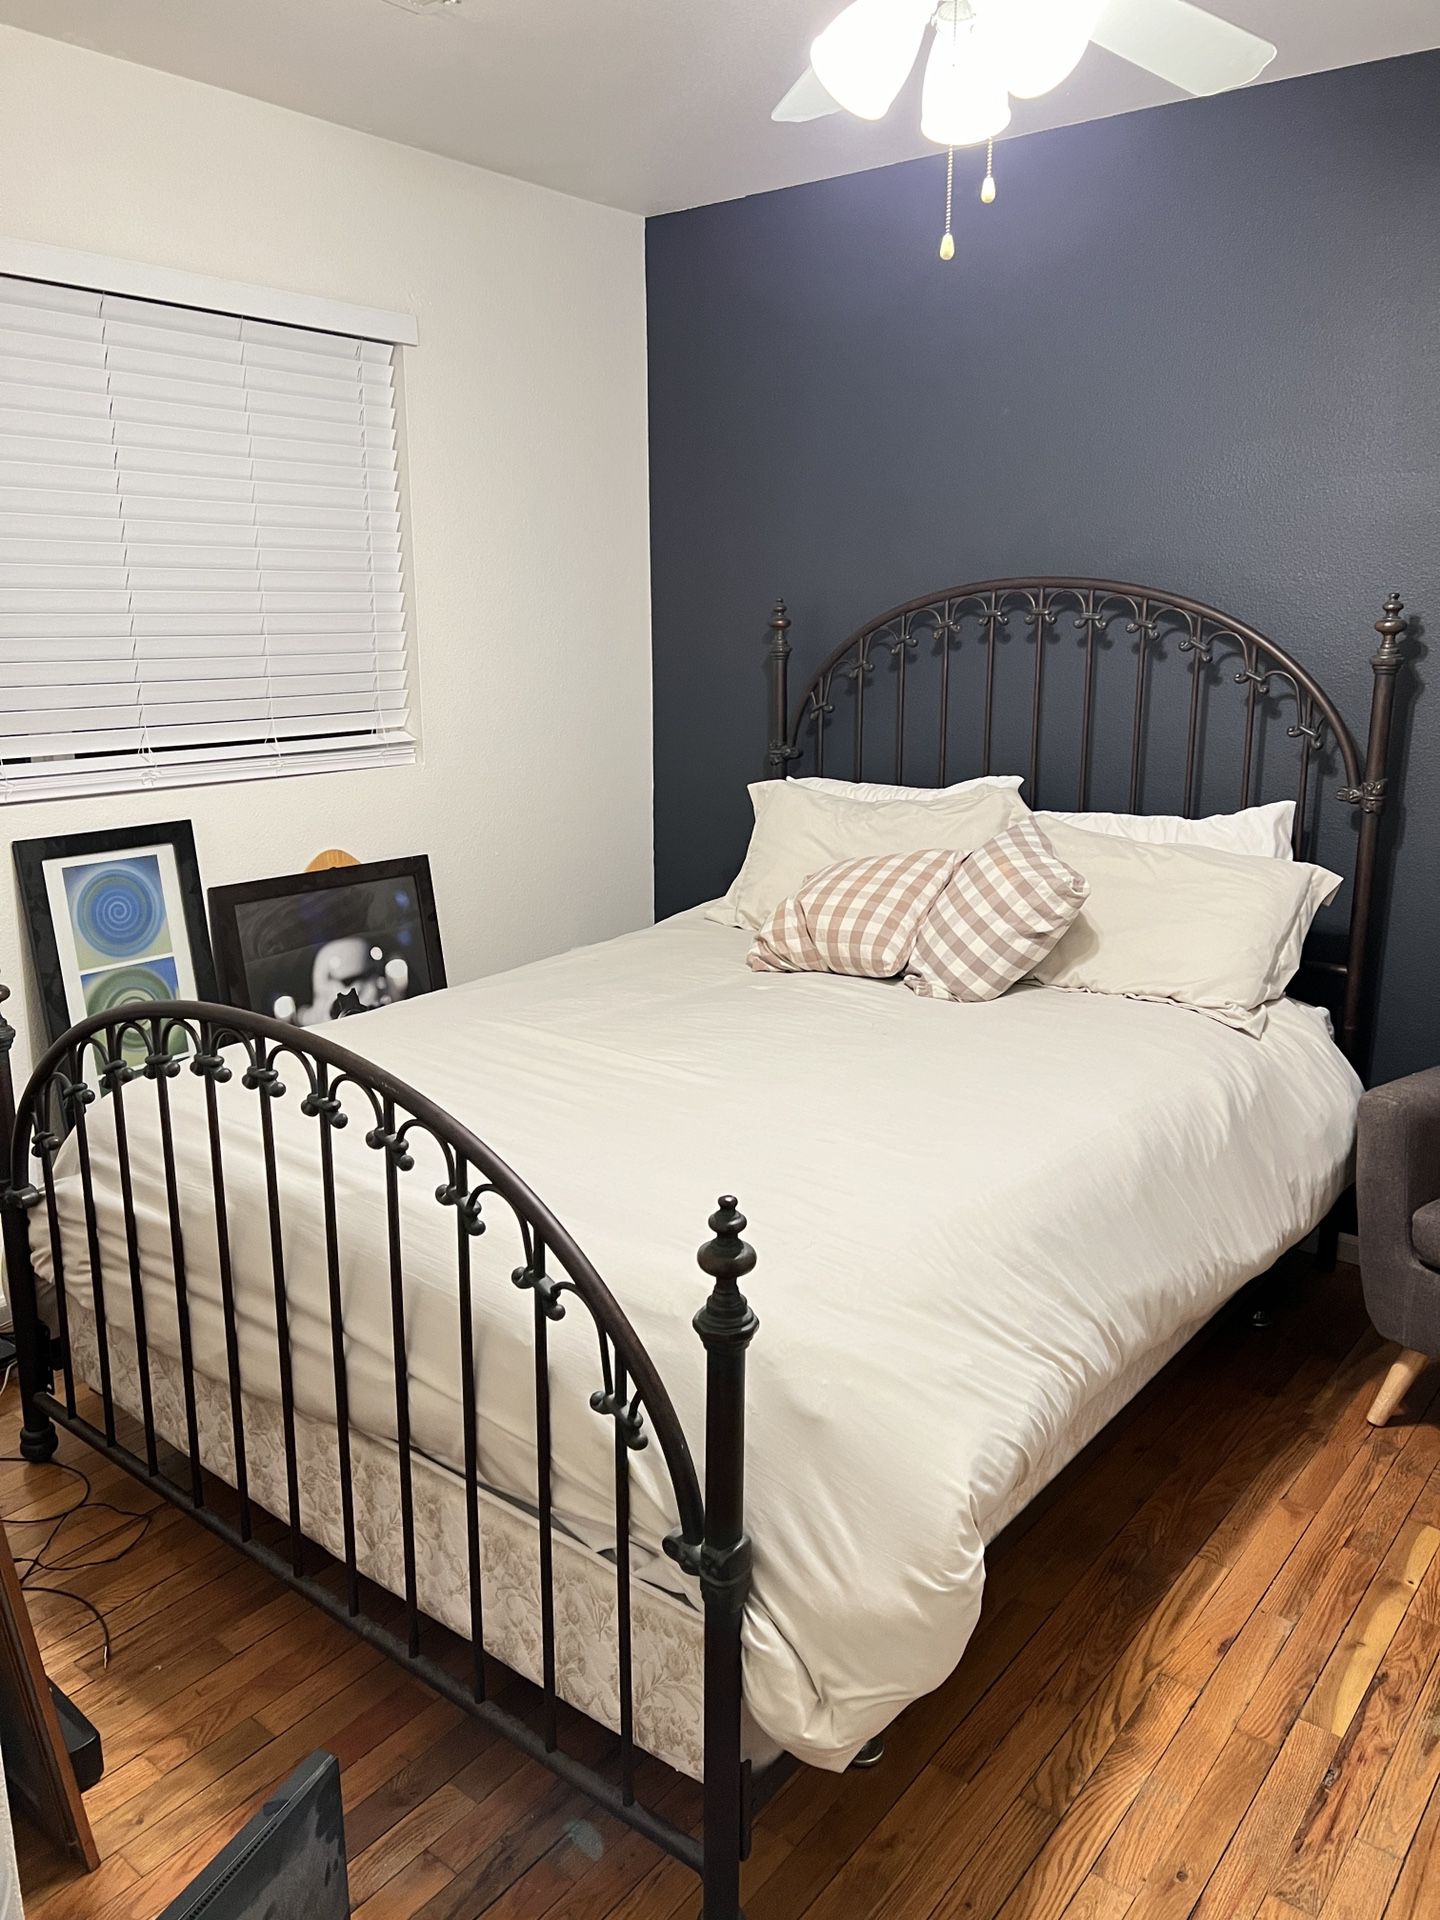 Iron Bed Frame 